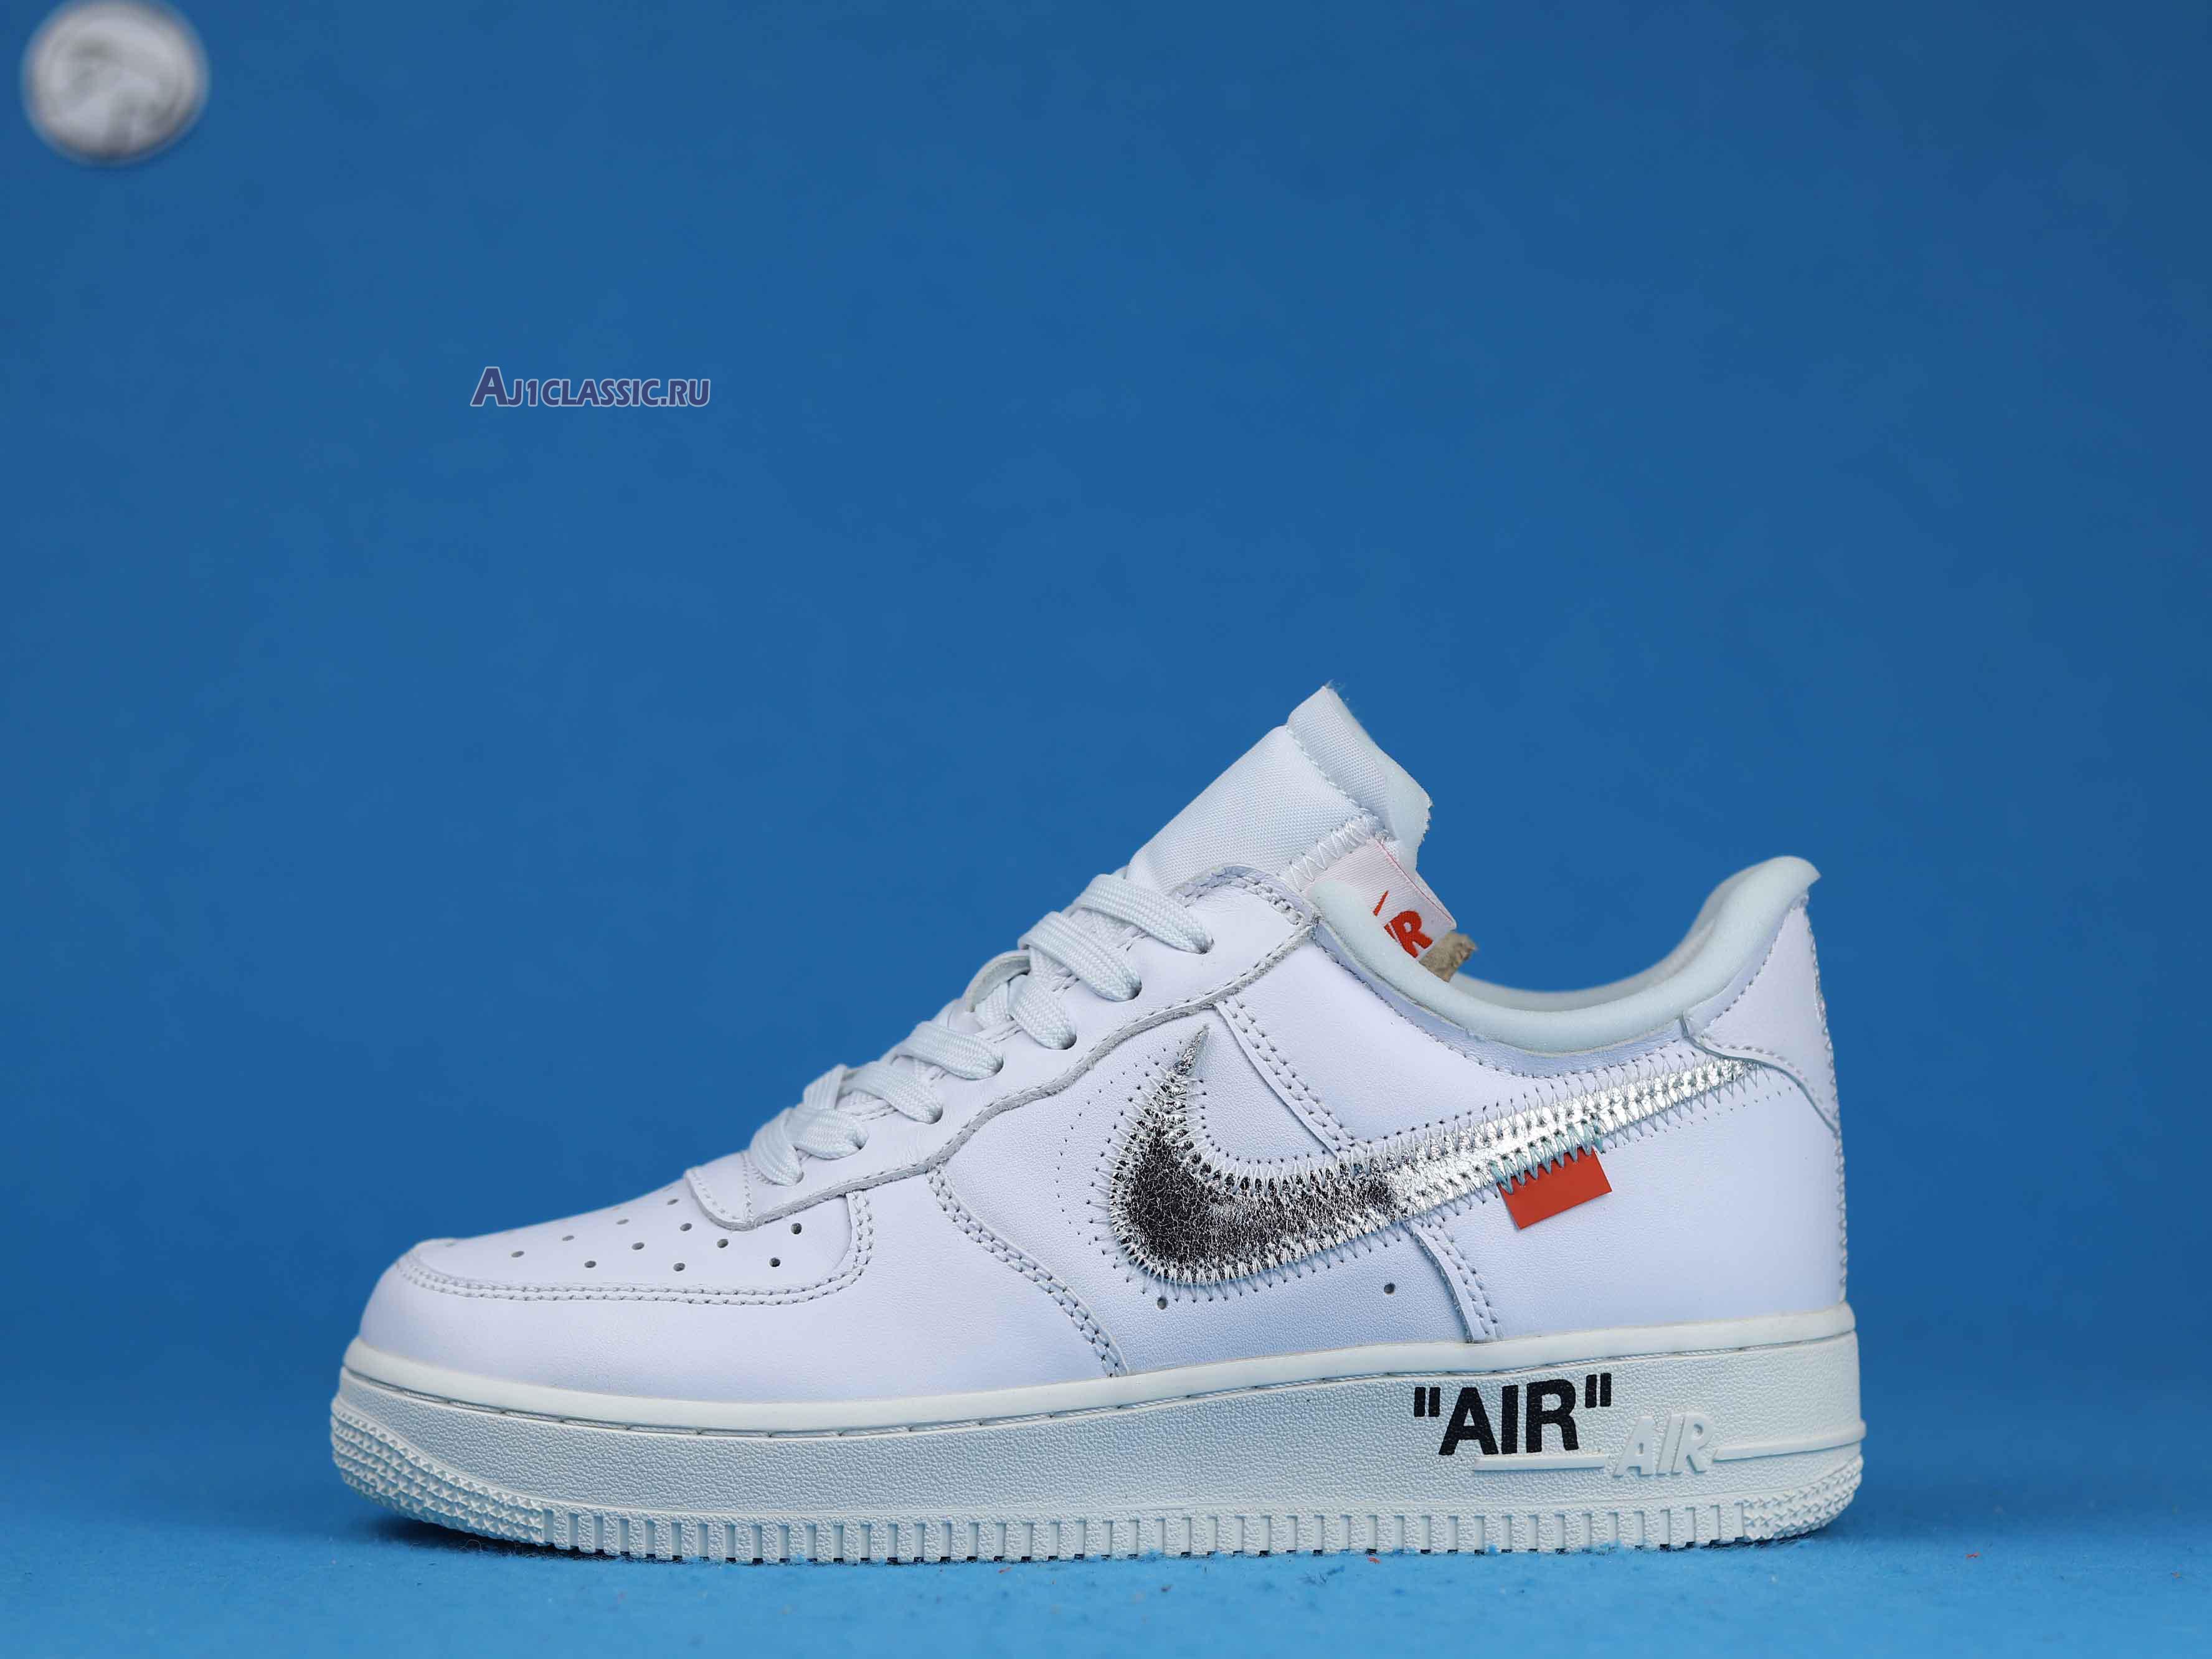 Off-White x Nike Air Force 1 Low "ComplexCon Exclusive" AO4297-100